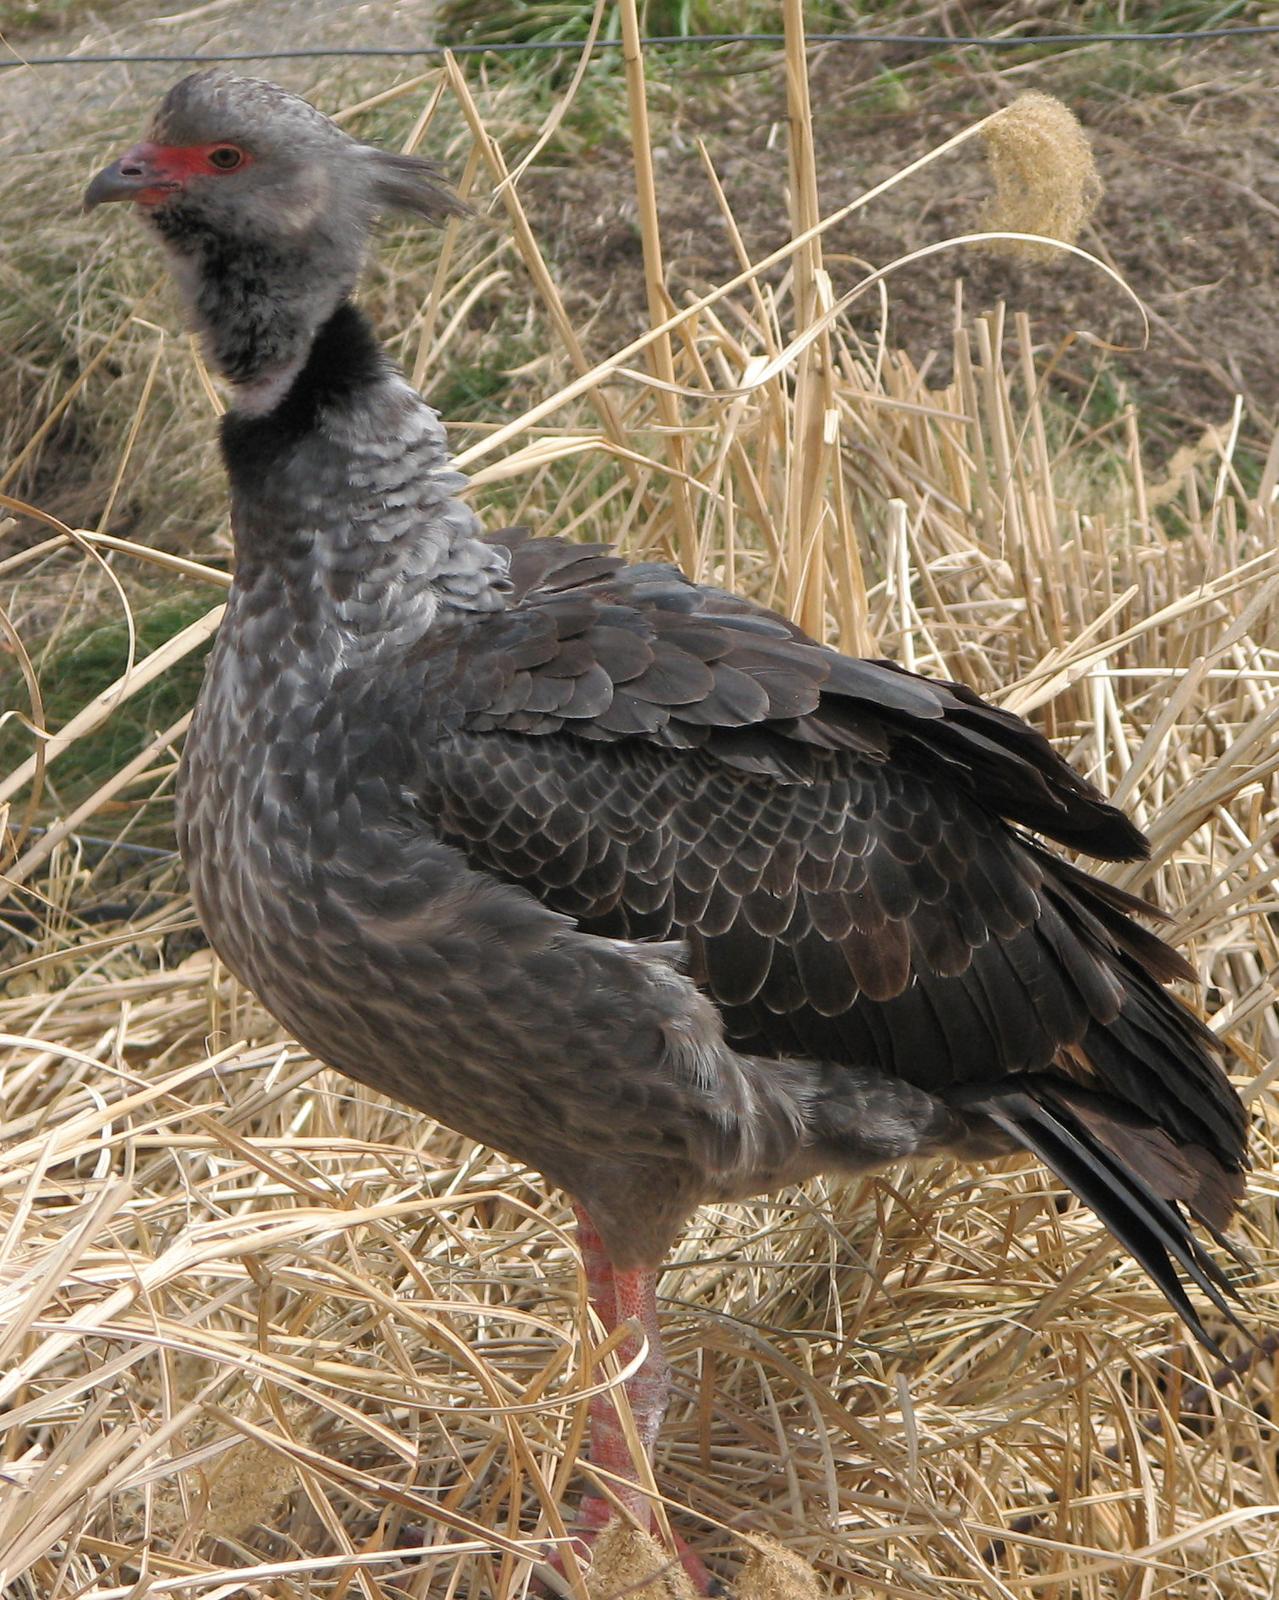 Southern Screamer Photo by Anne Terry